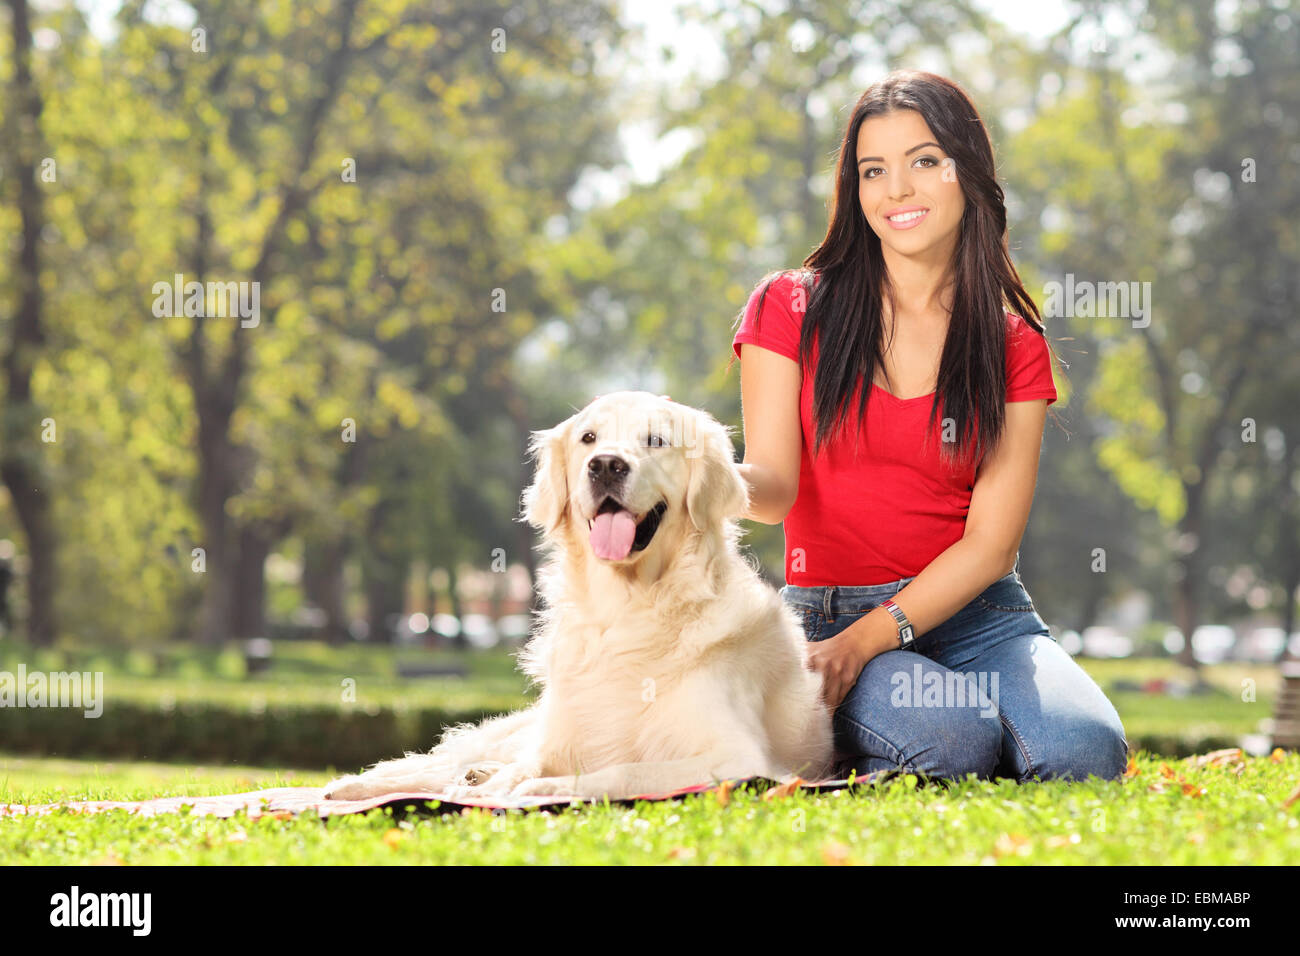 Girl sitting in park with her pet dog Stock Photo